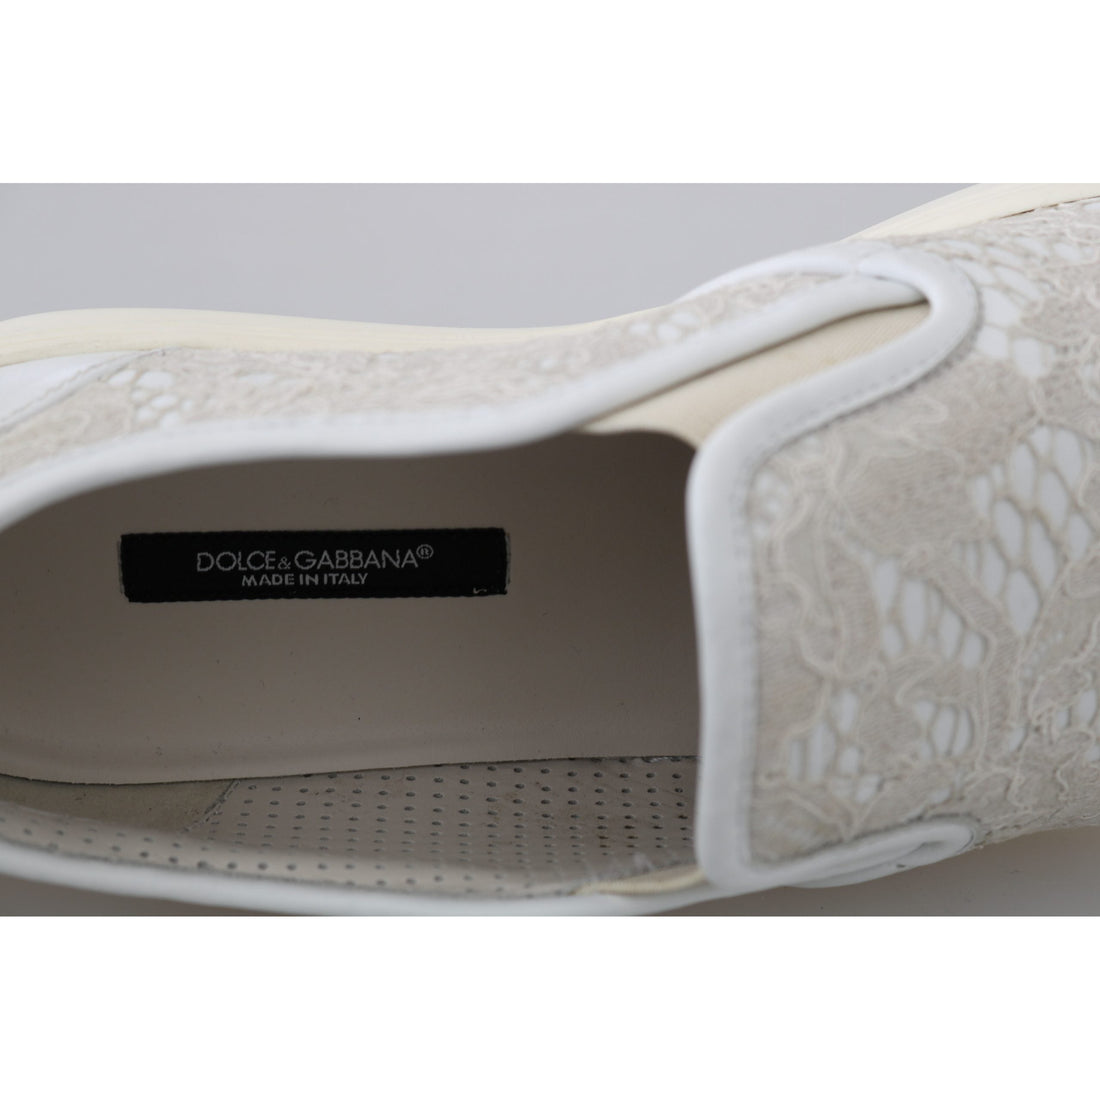 Dolce & Gabbana White Leather Lace Slip On Loafers Shoes - Paris Deluxe